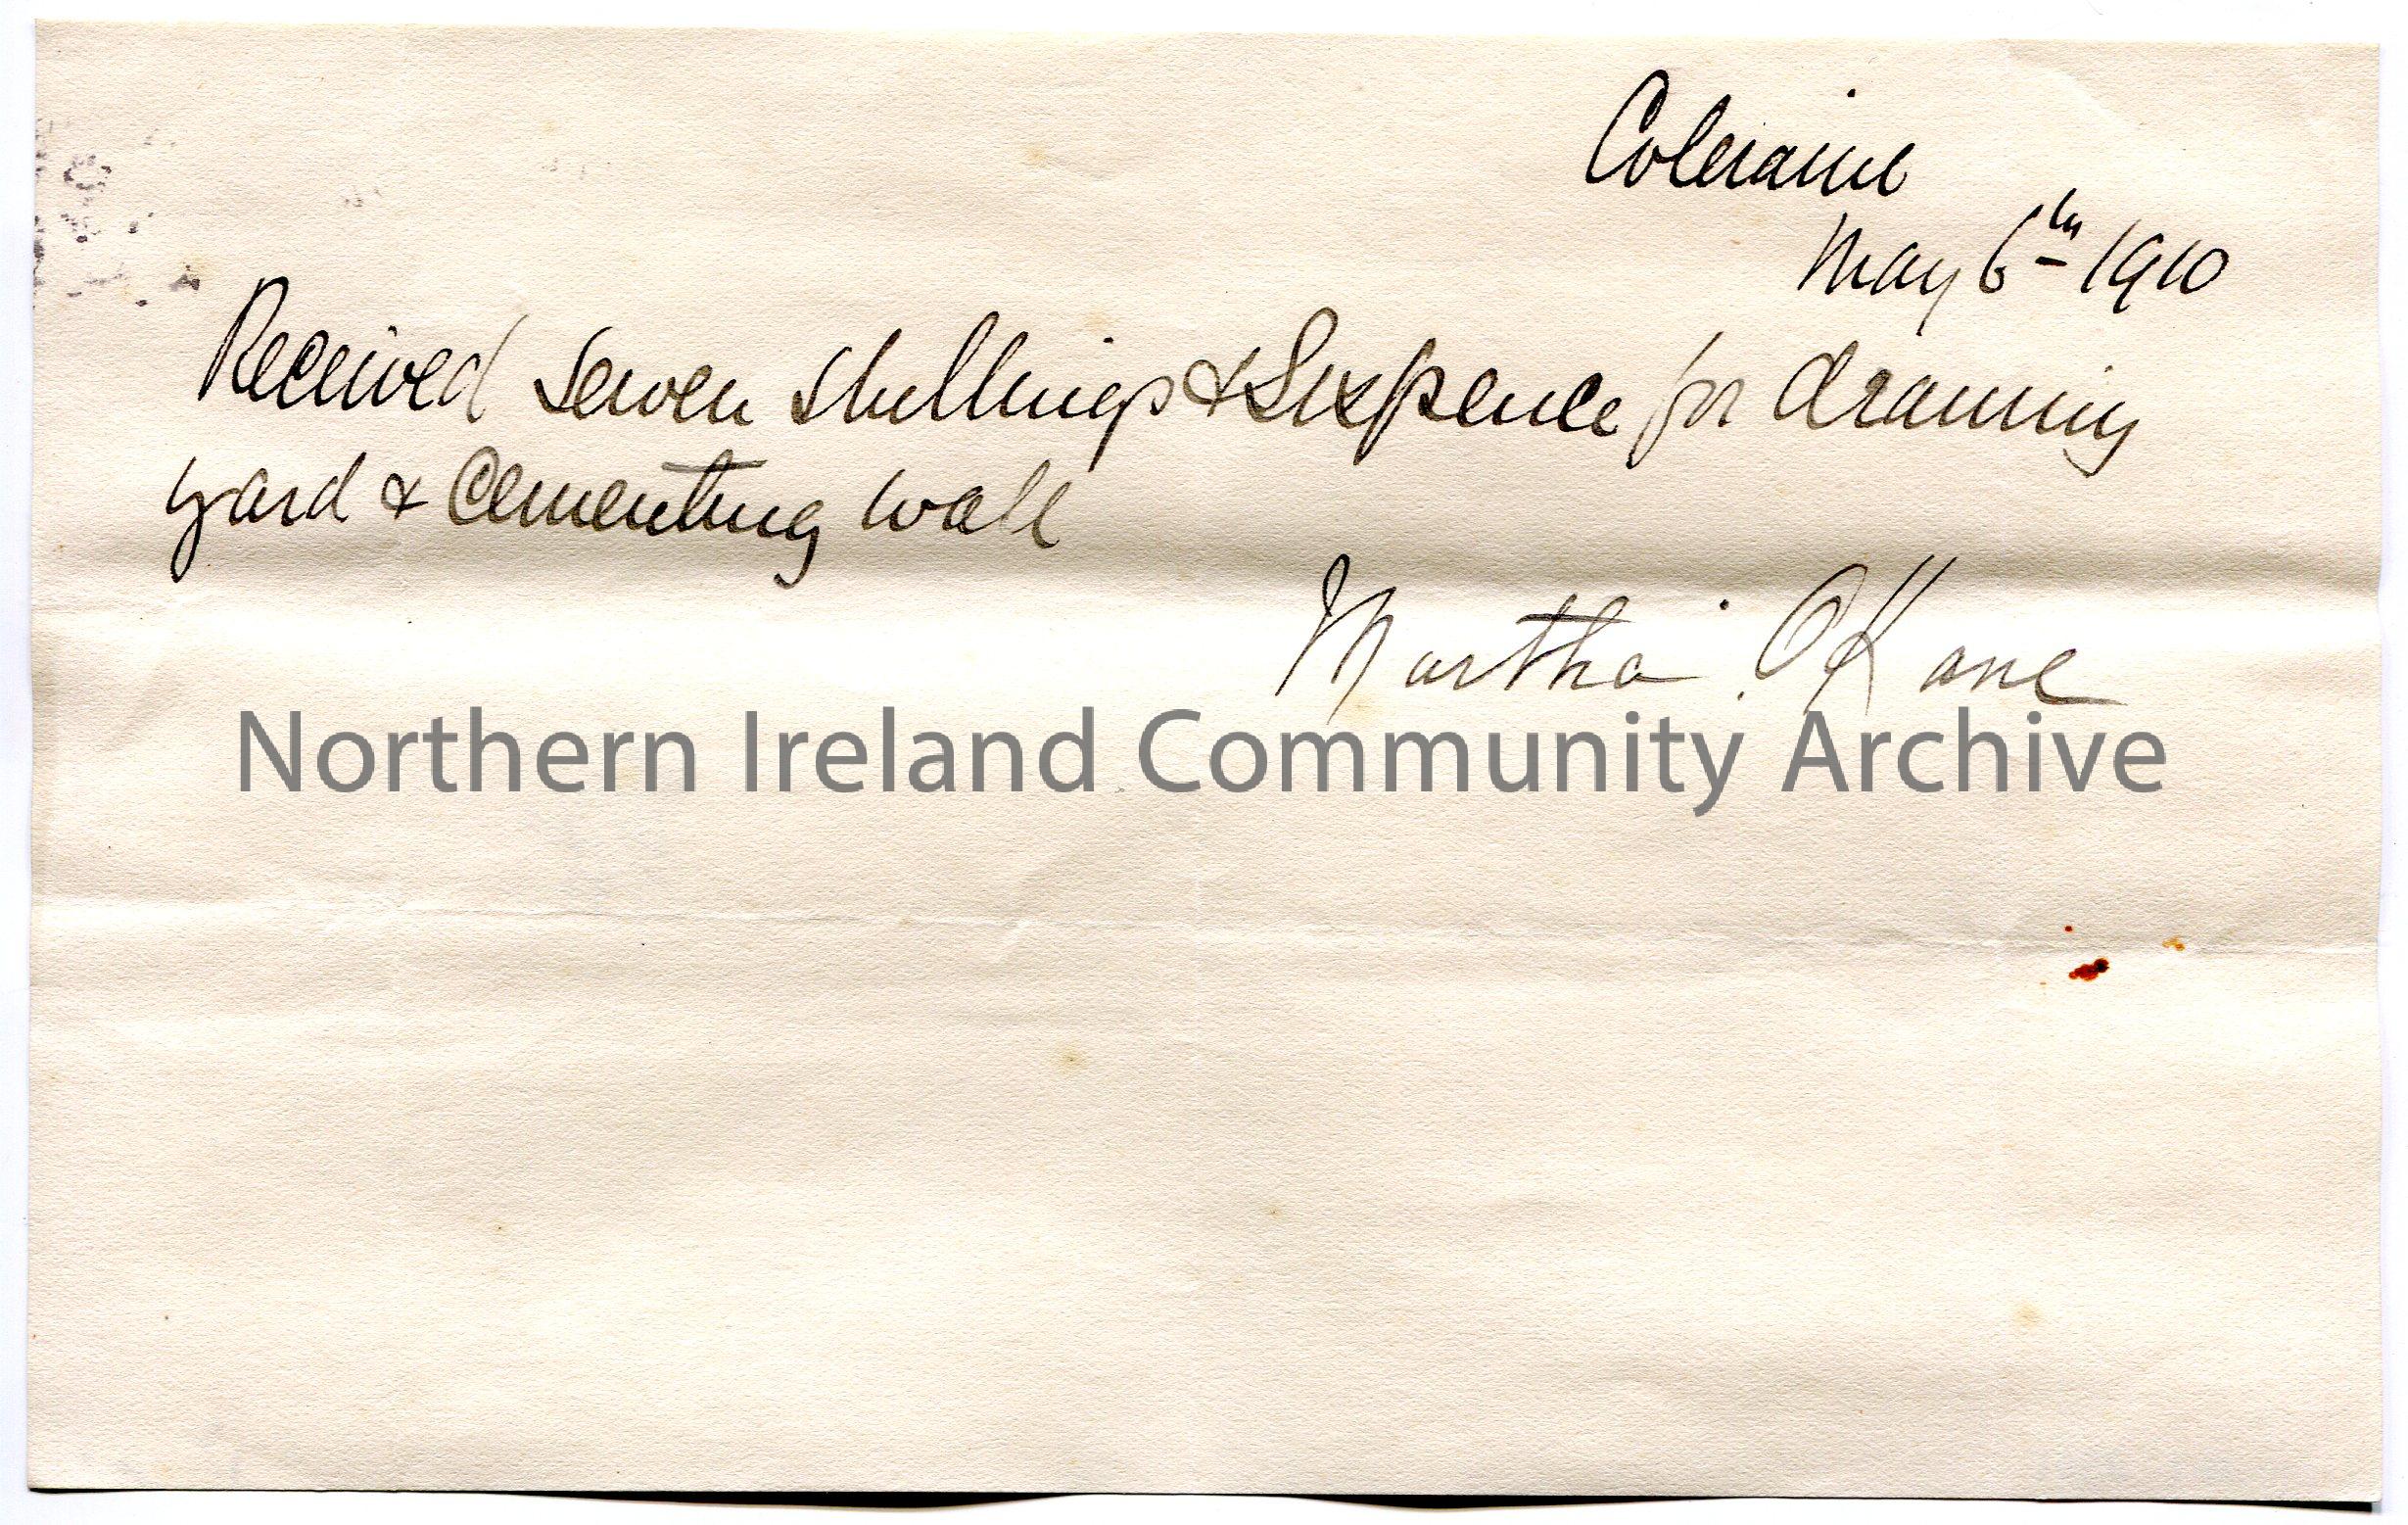 Handwritten receipt for payment of £0.7.6 for ‘draining yard and cementing wall. Signed by Martha O’Kane and dated Coleraine 6th May, 1910.